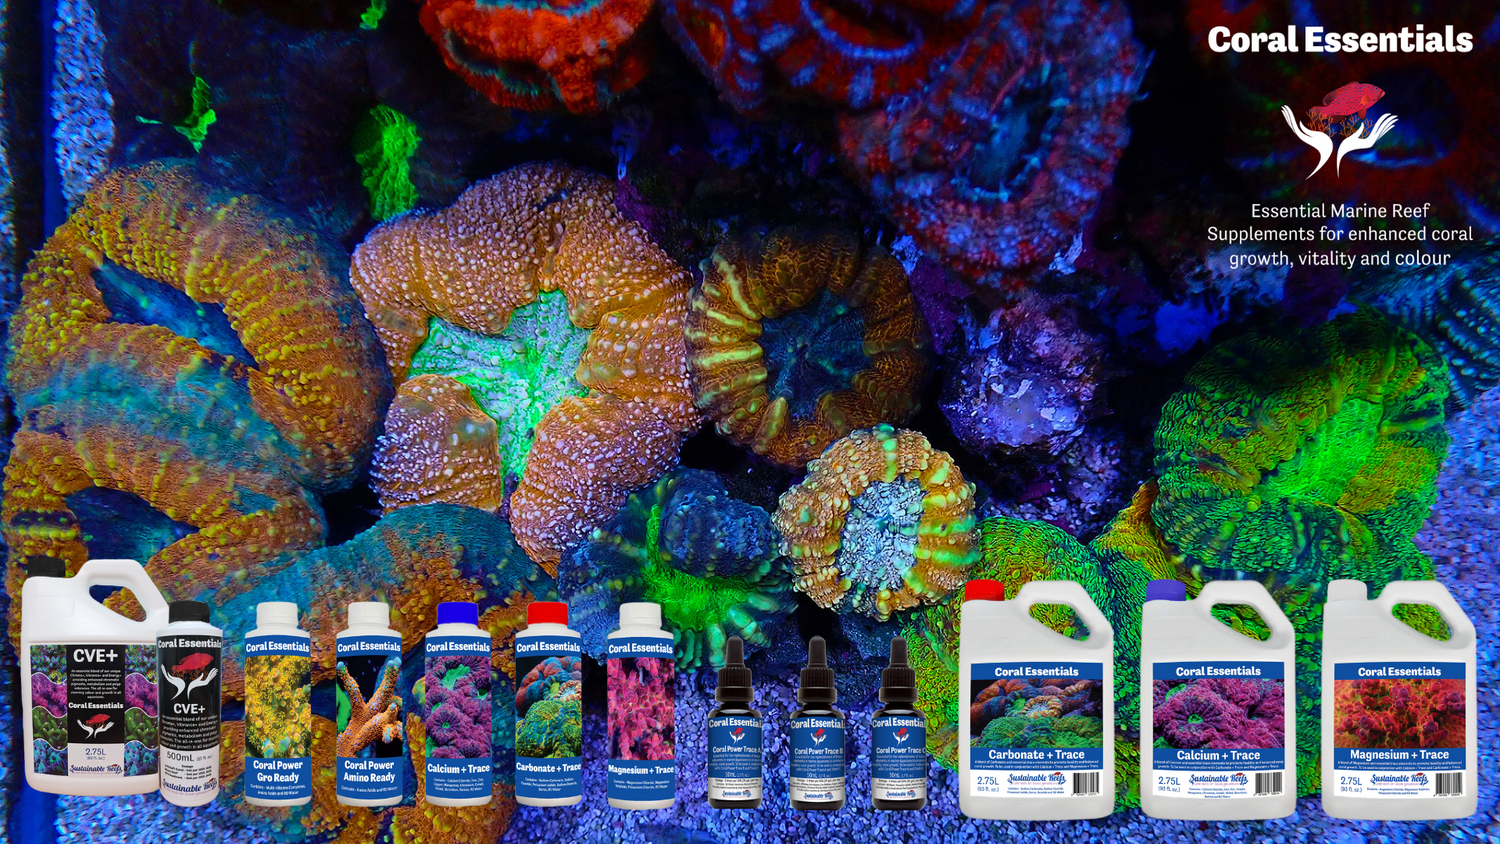 Coral essentials products on a coral reef